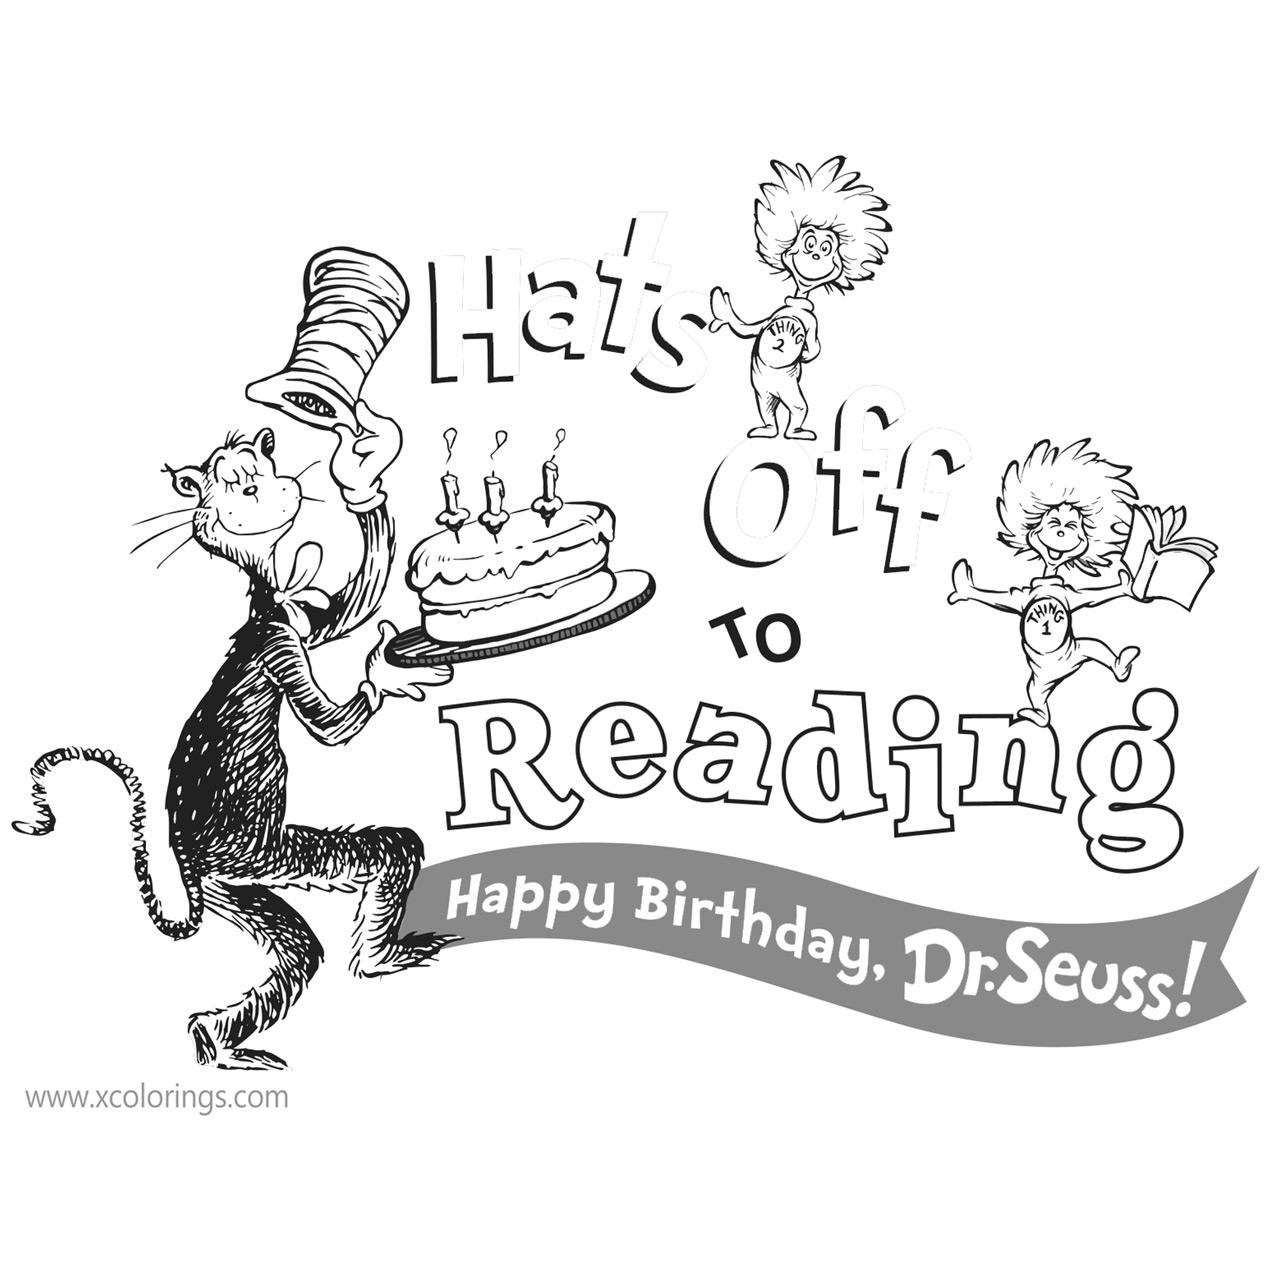 Free Happy Birthday Dr Seuss Coloring Pages Cat In The Hat and Thing One Ting Two printable